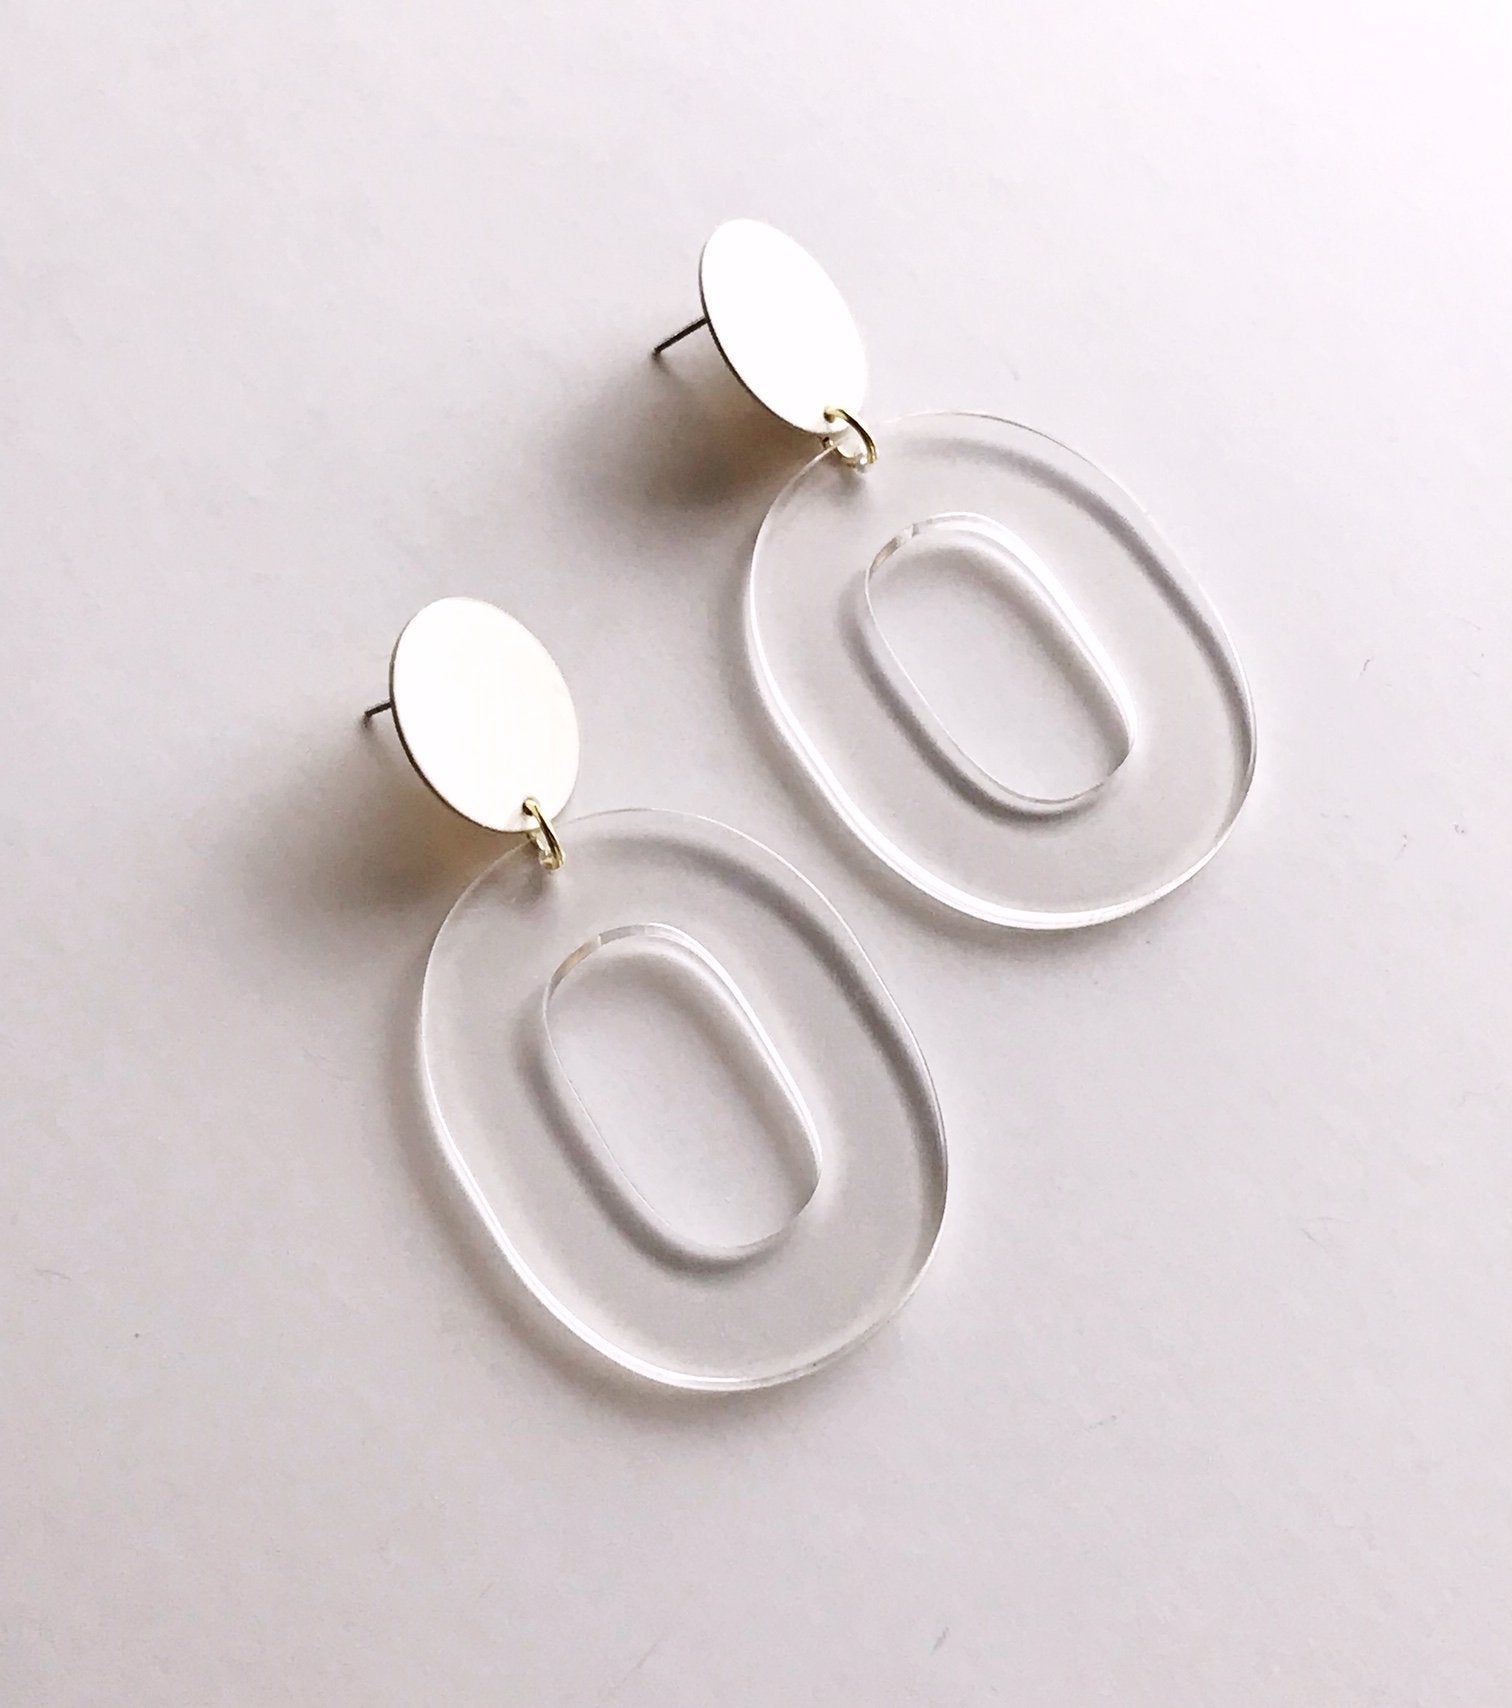 Ivory and Clear Acetate Hoop Earrings - Lightweight Statement Jewelry for Everyday Wear - Jewelry & Watches - Bijou Her -  -  - 